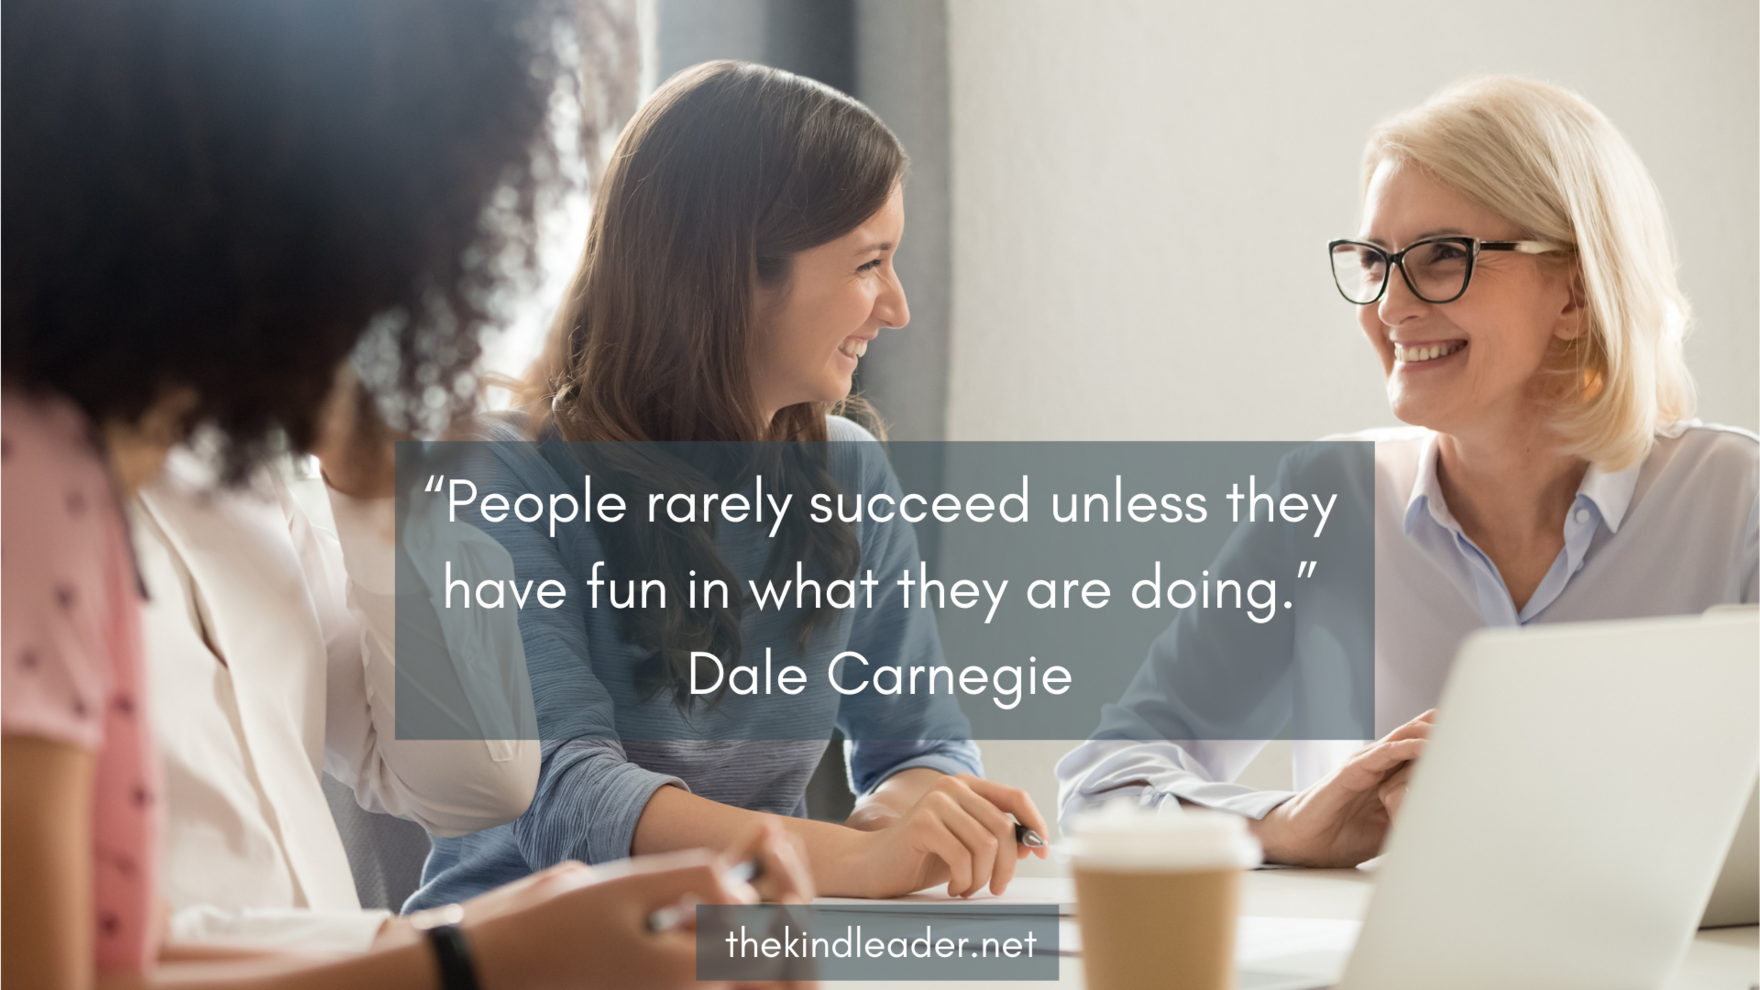 “People rarely succeed unless they have fun in what they are doing.” (Dale Carnegie)